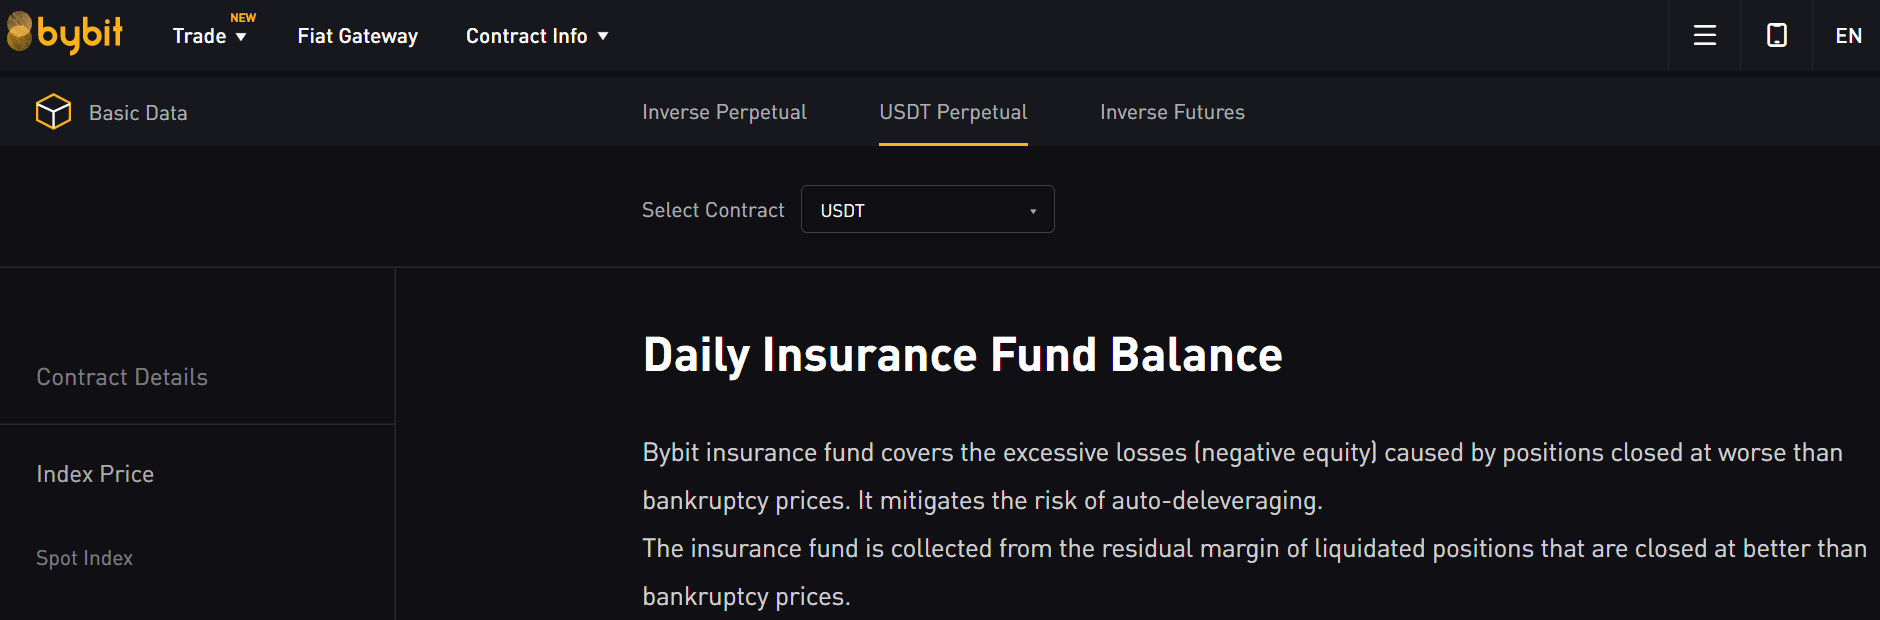 Bybit Insurance funds